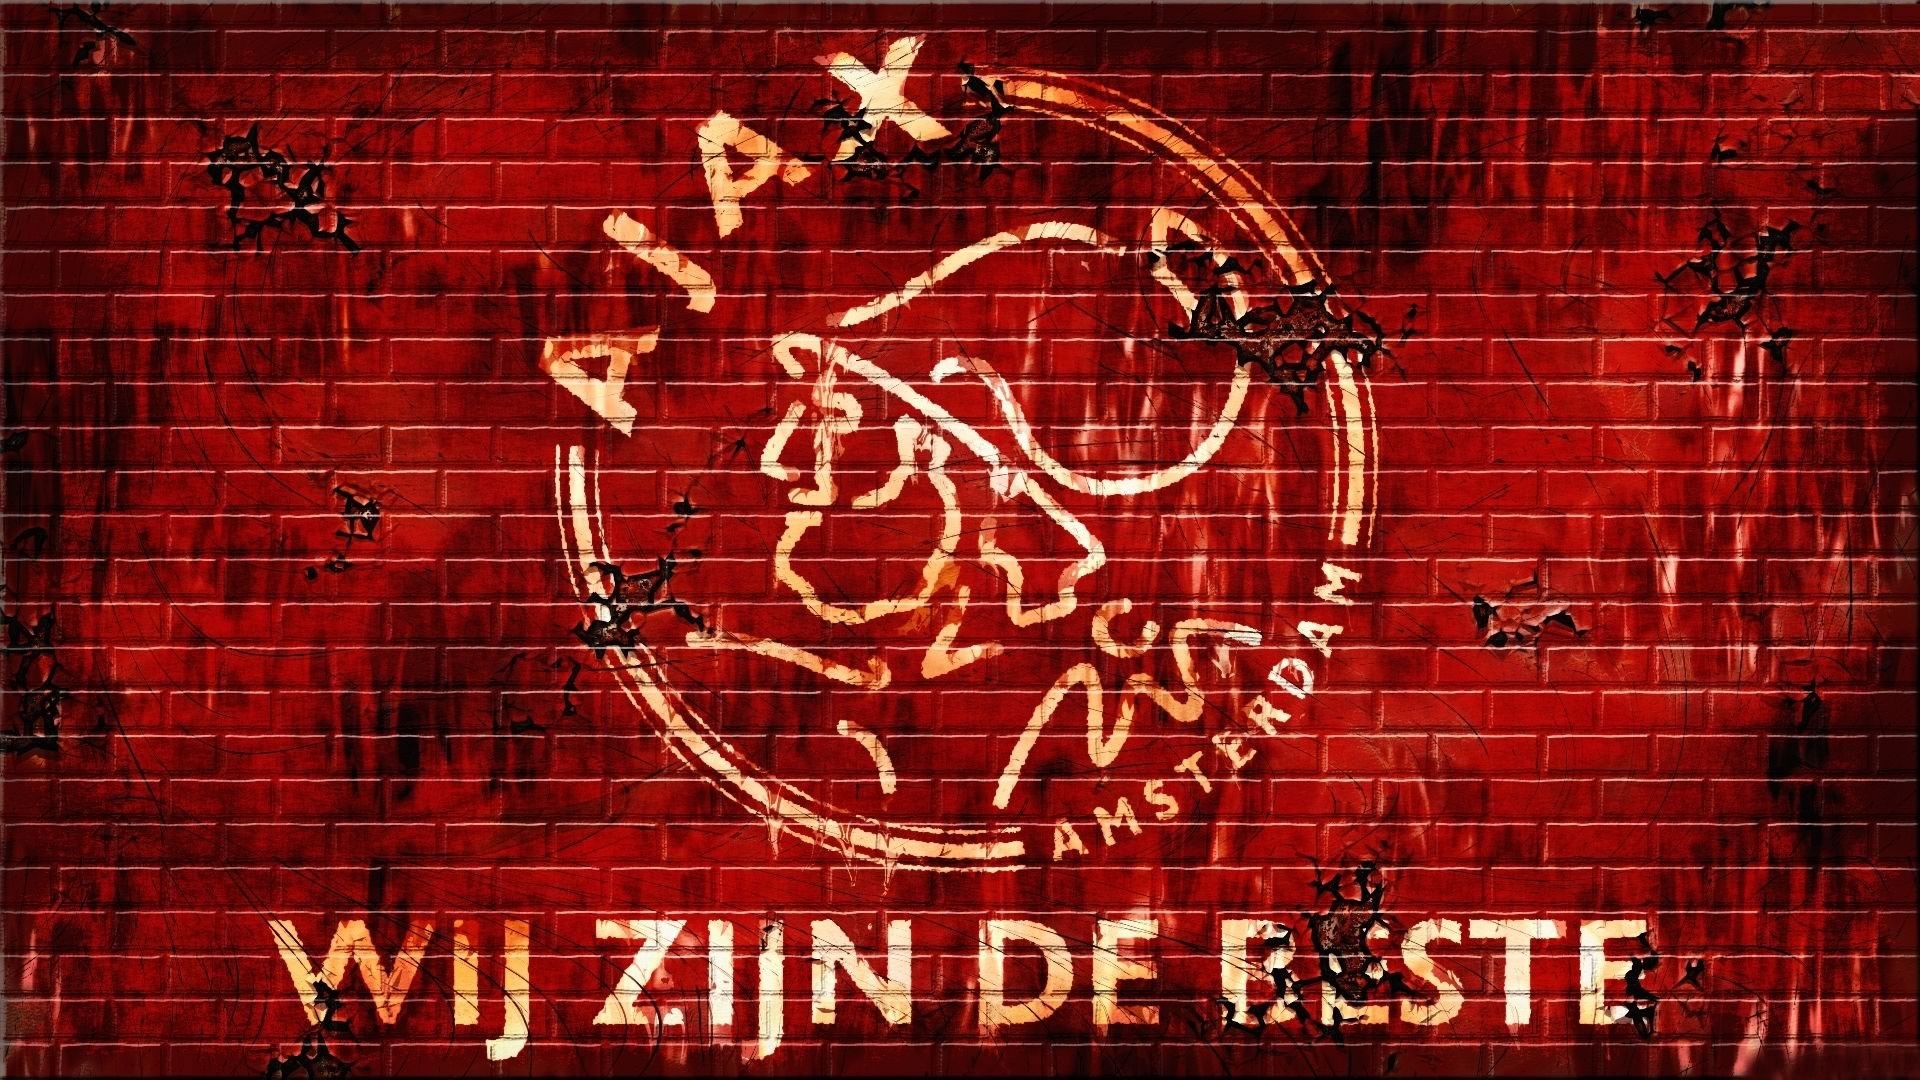 Wallpapers Ajax with high-resolution 1920x1080 pixel. You can use this wallpaper for your Desktop Computers, Mac Screensavers, Windows Backgrounds, iPhone Wallpapers, Tablet or Android Lock screen and another Mobile device